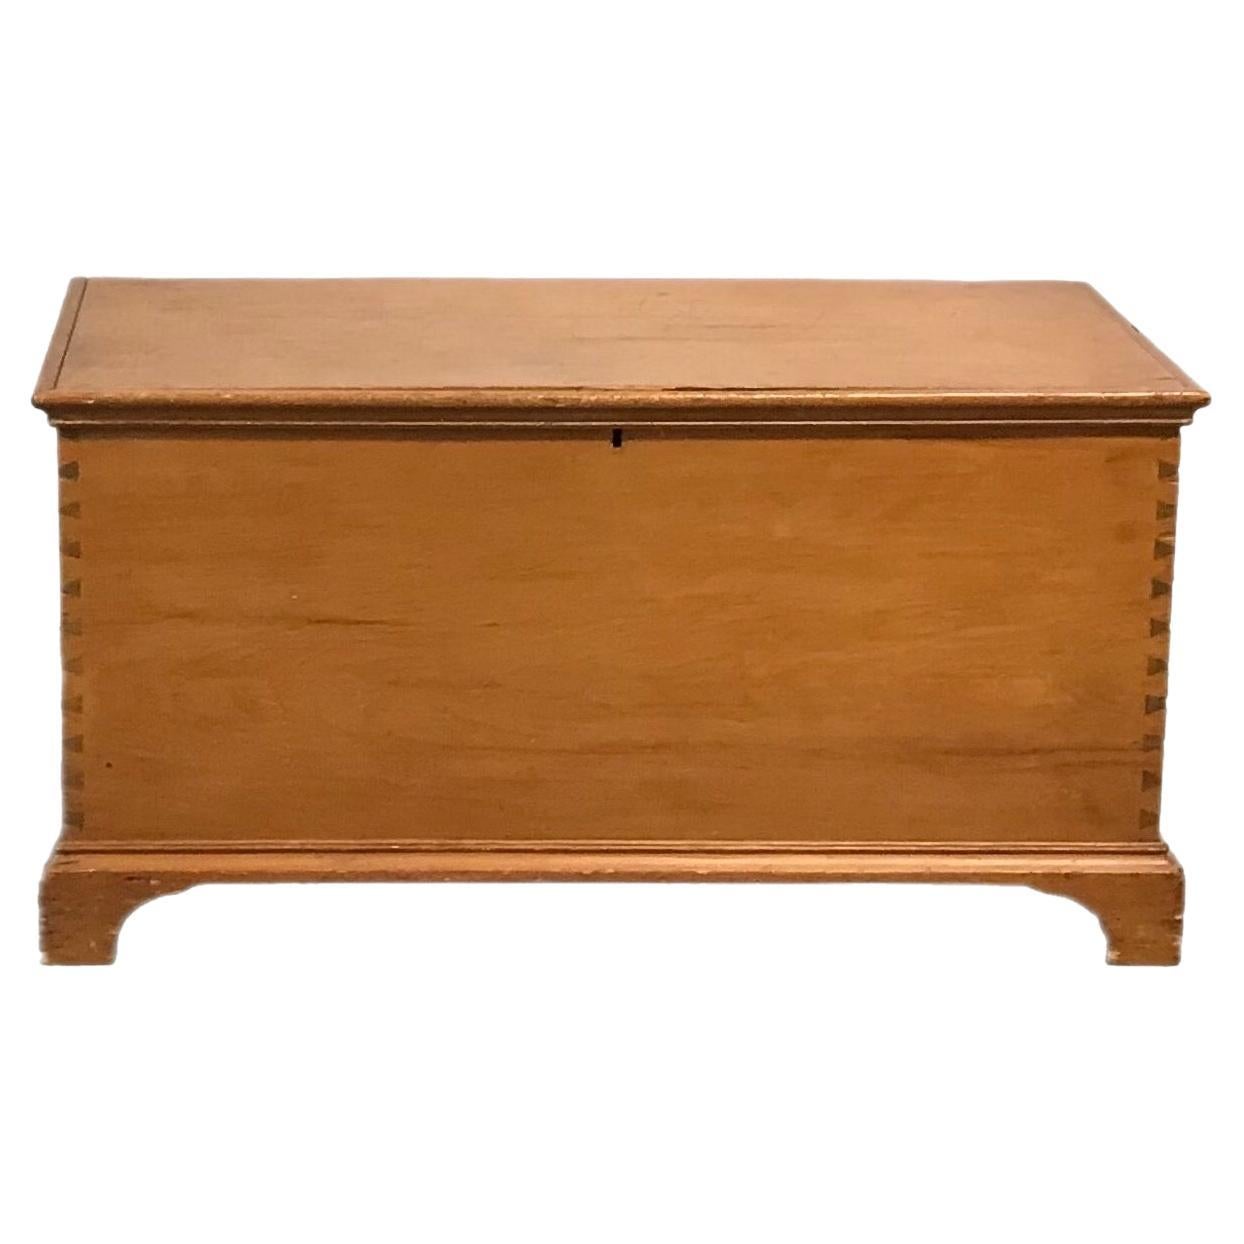 Early American Blanket Chest For Sale